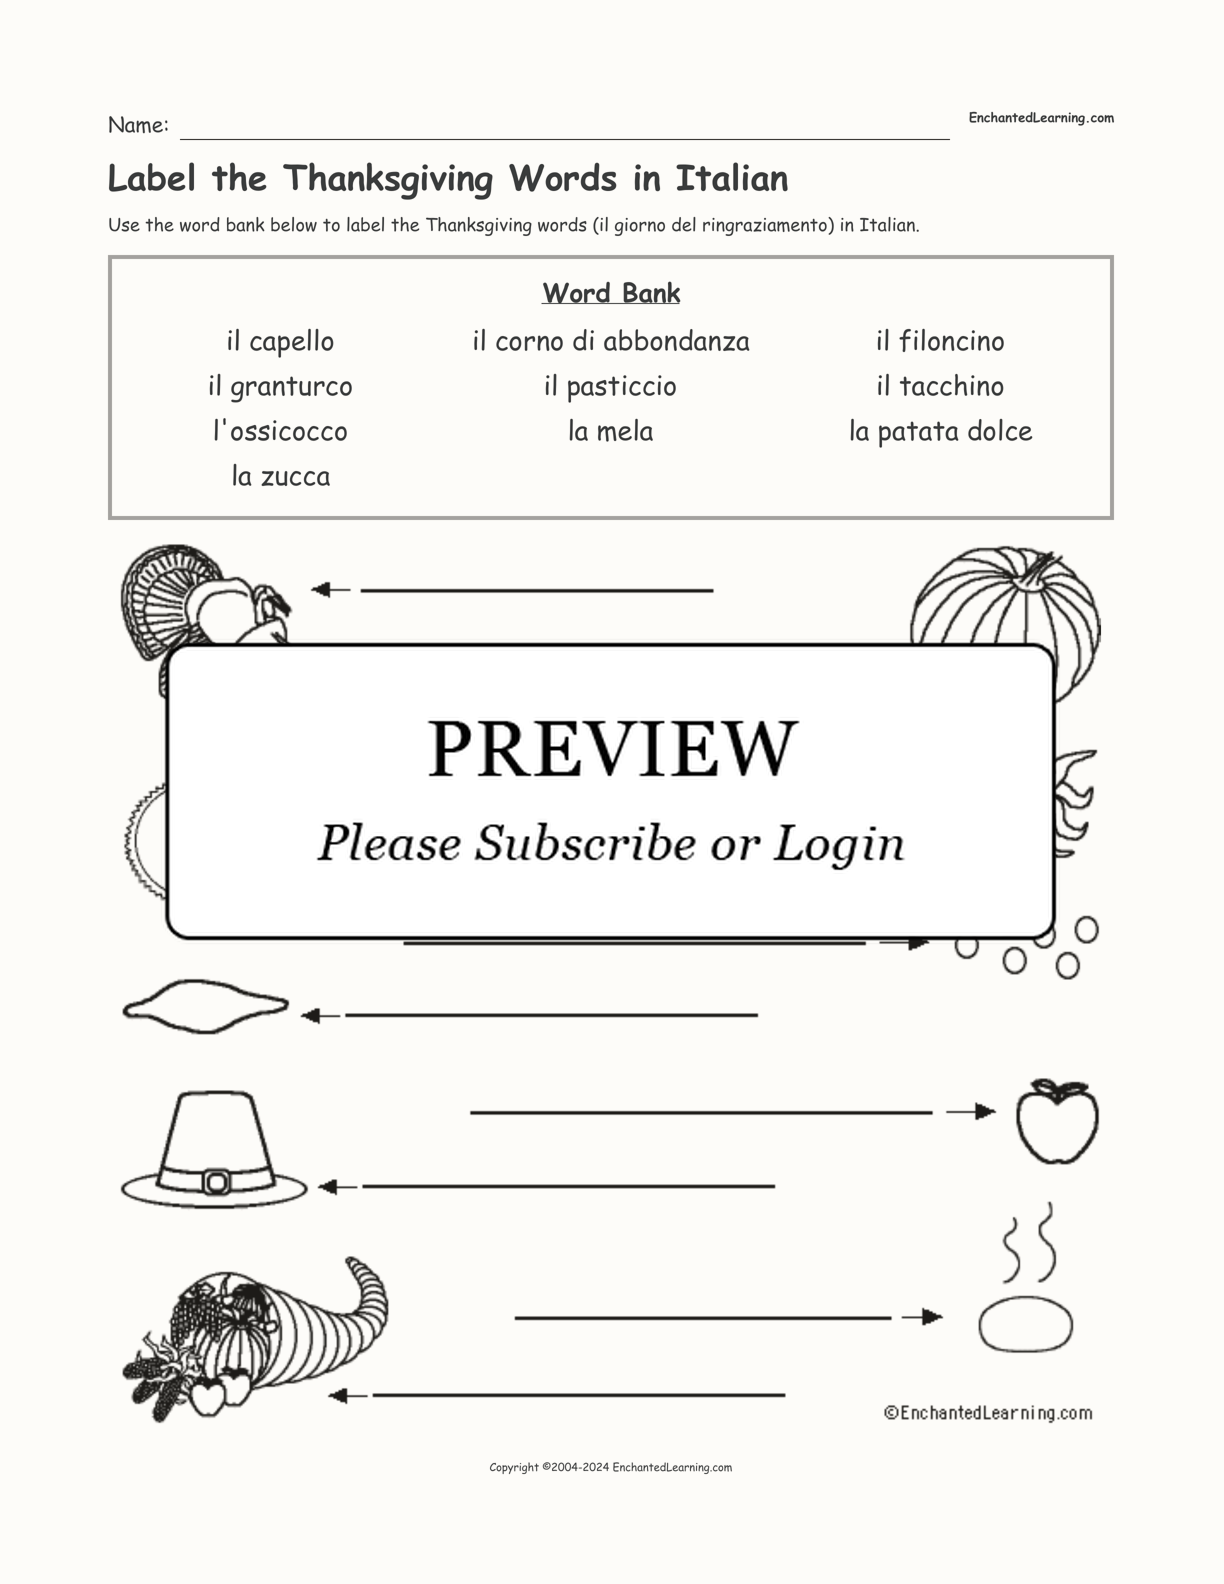 Label the Thanksgiving Words in Italian interactive worksheet page 1